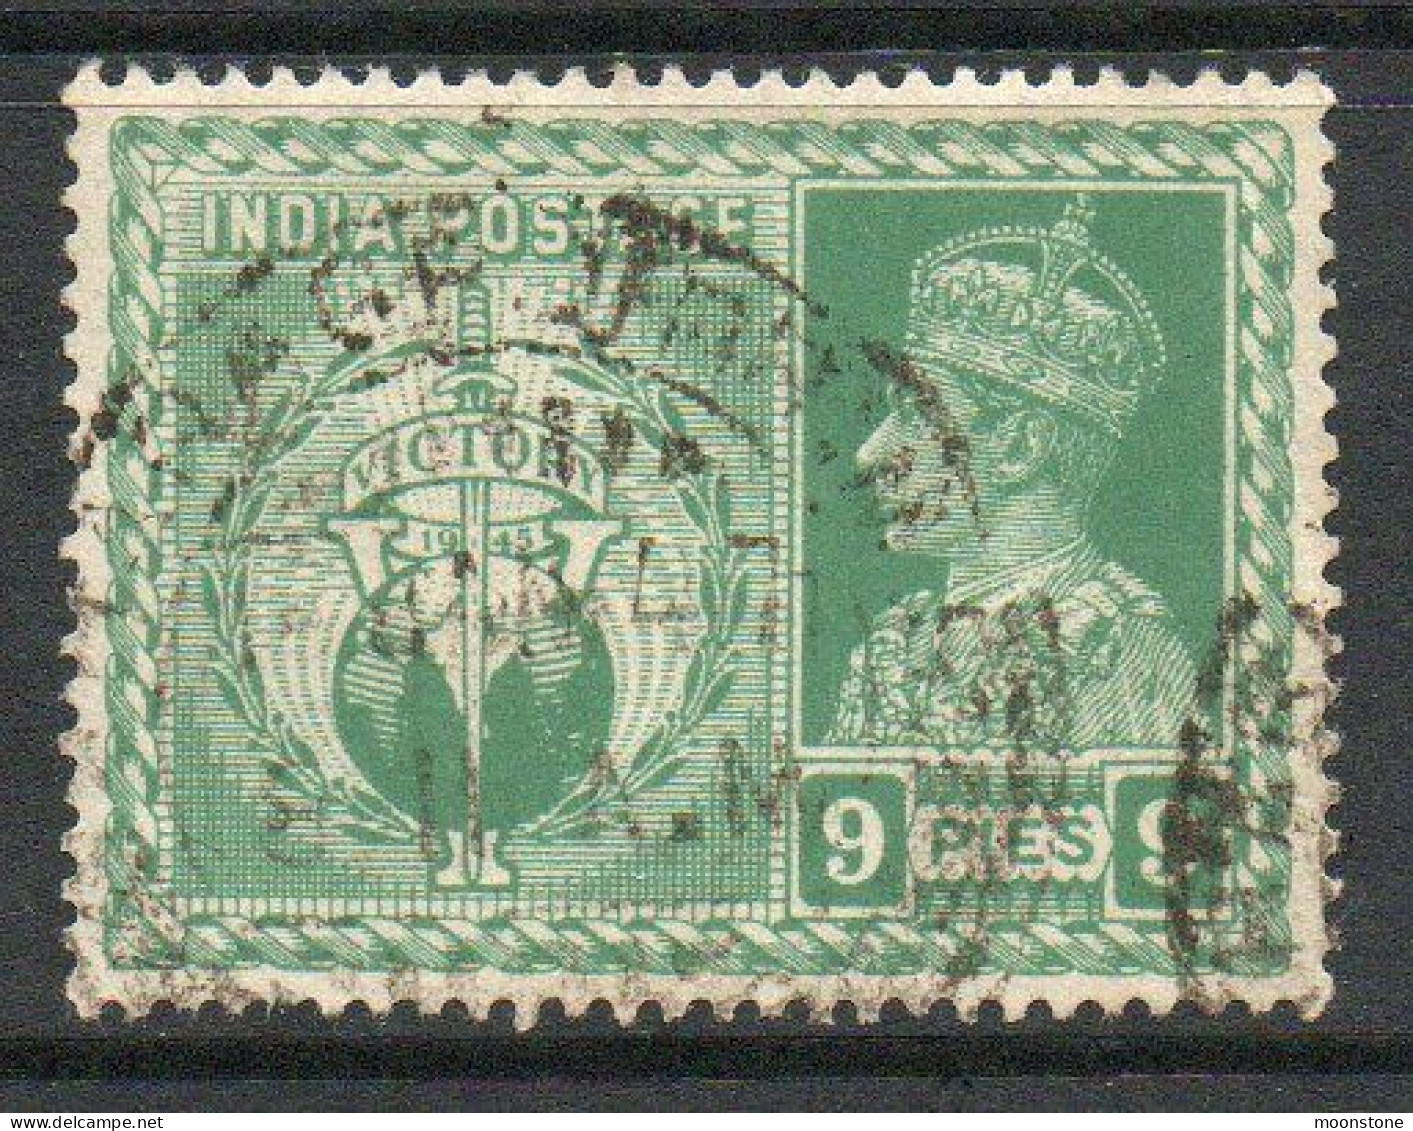 India 1946 GVI Victory 9 Pies Yellow-green, Wmk. Multiple Star, Used, SG 278 (E) - 1936-47 King George VI